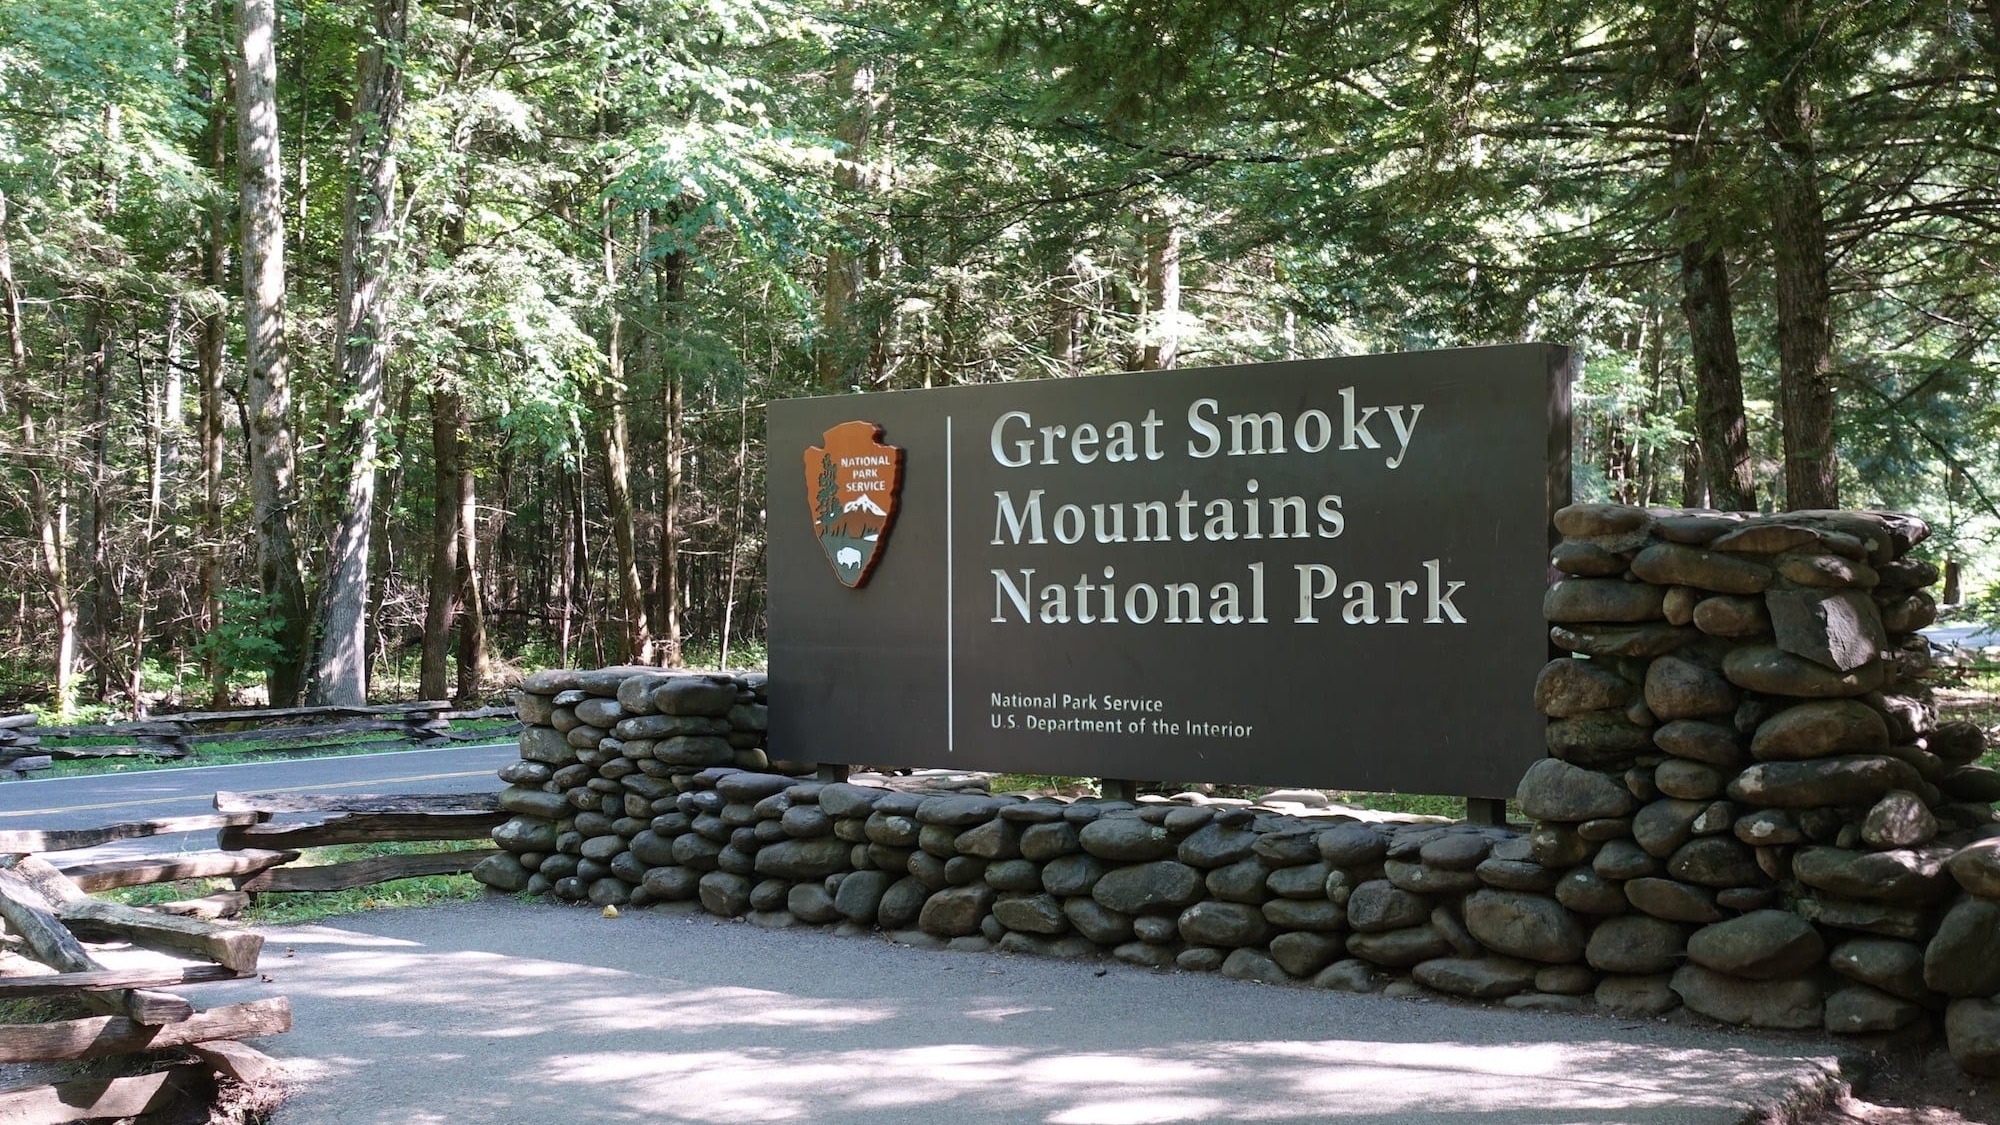 4 Days, 3 Nights In Sevierville, Tn - Smoky Mountains Tennessee